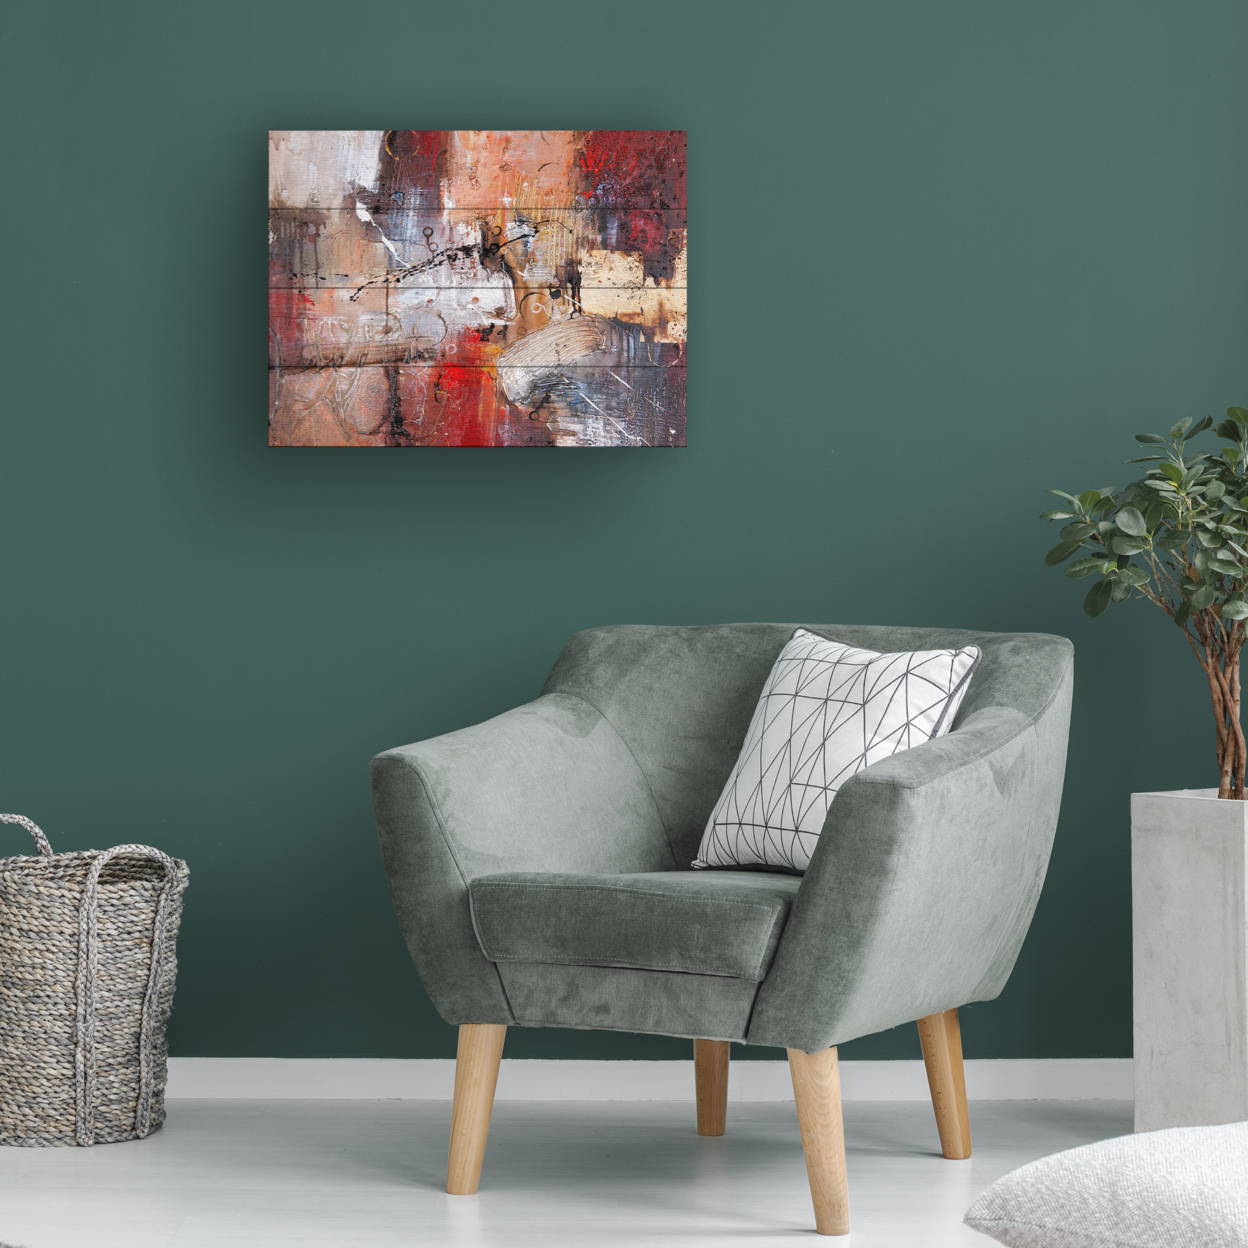 Wall Art 12 X 16 Inches Titled Cube Abstract V Ready To Hang Printed On Wooden Planks